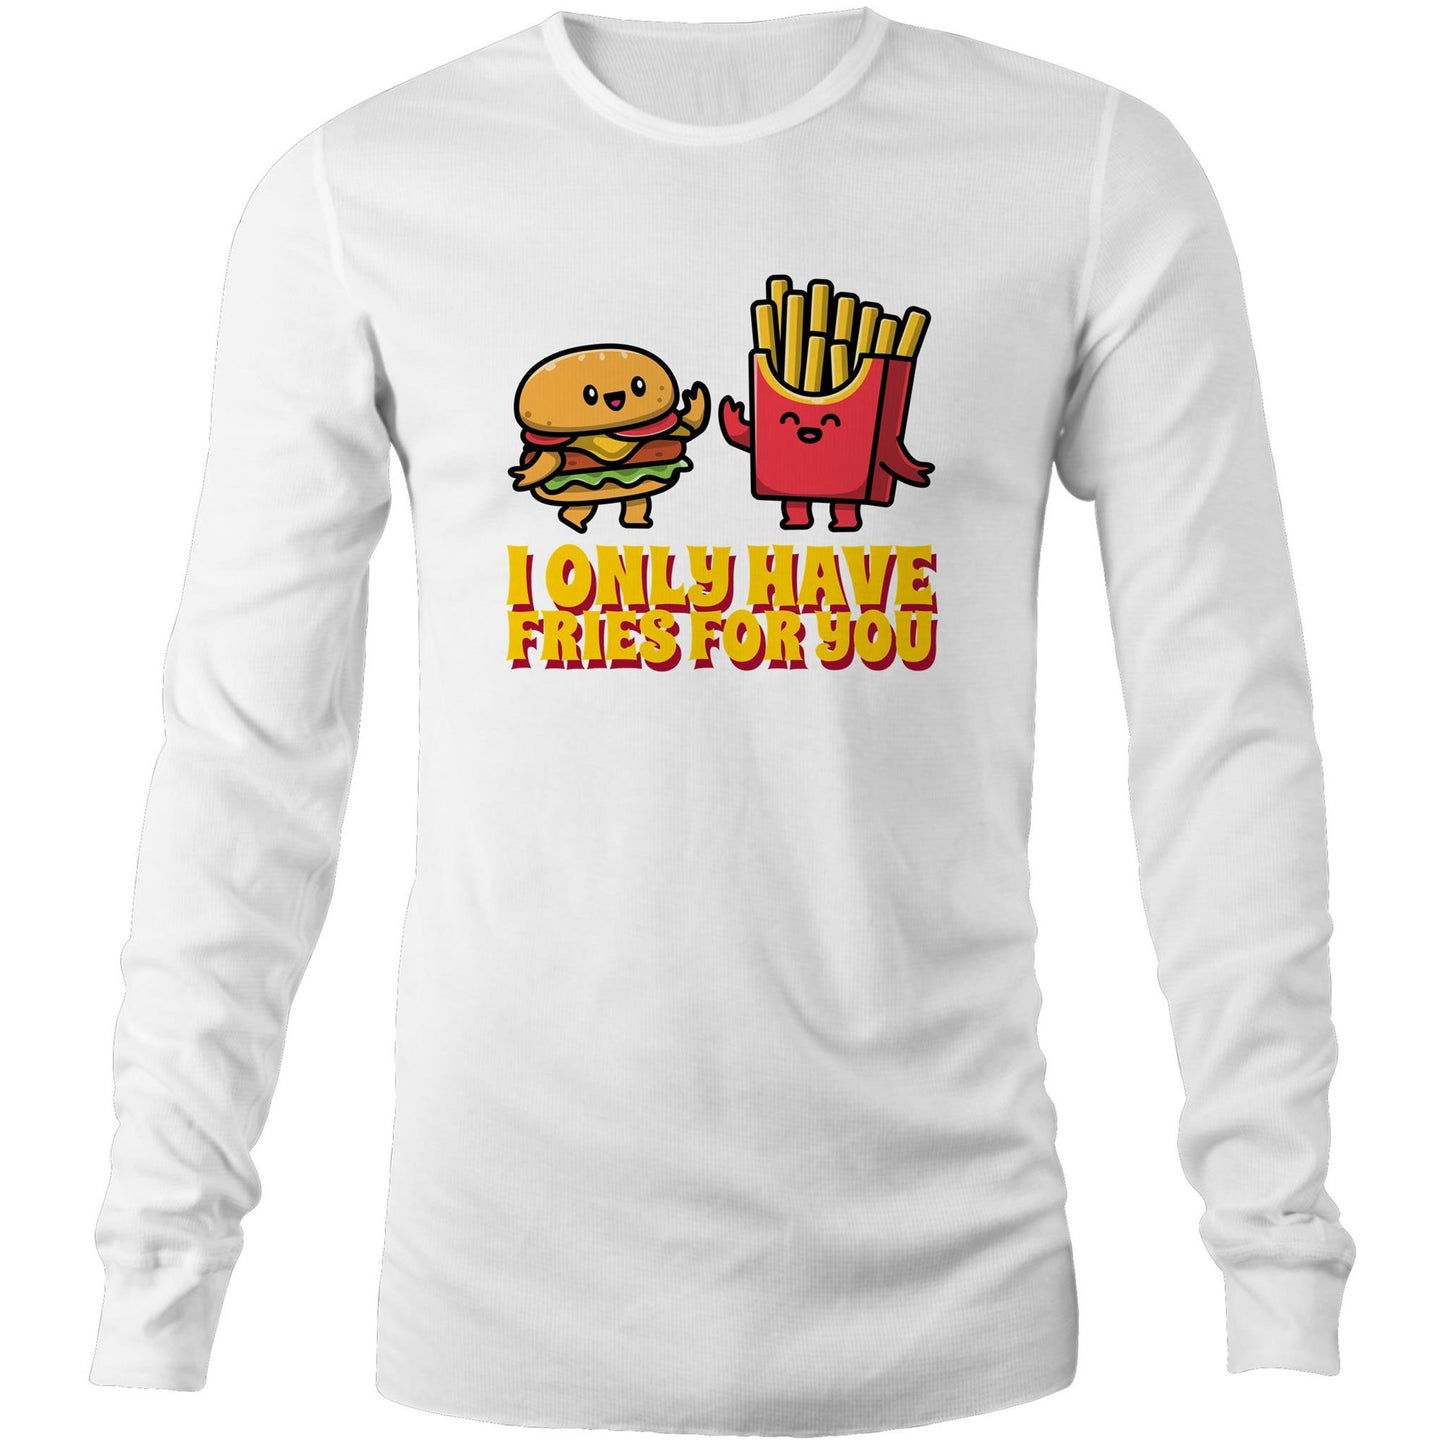 I Only Have Fries For You, Burger And Fries - Long Sleeve T-Shirt White Unisex Long Sleeve T-shirt